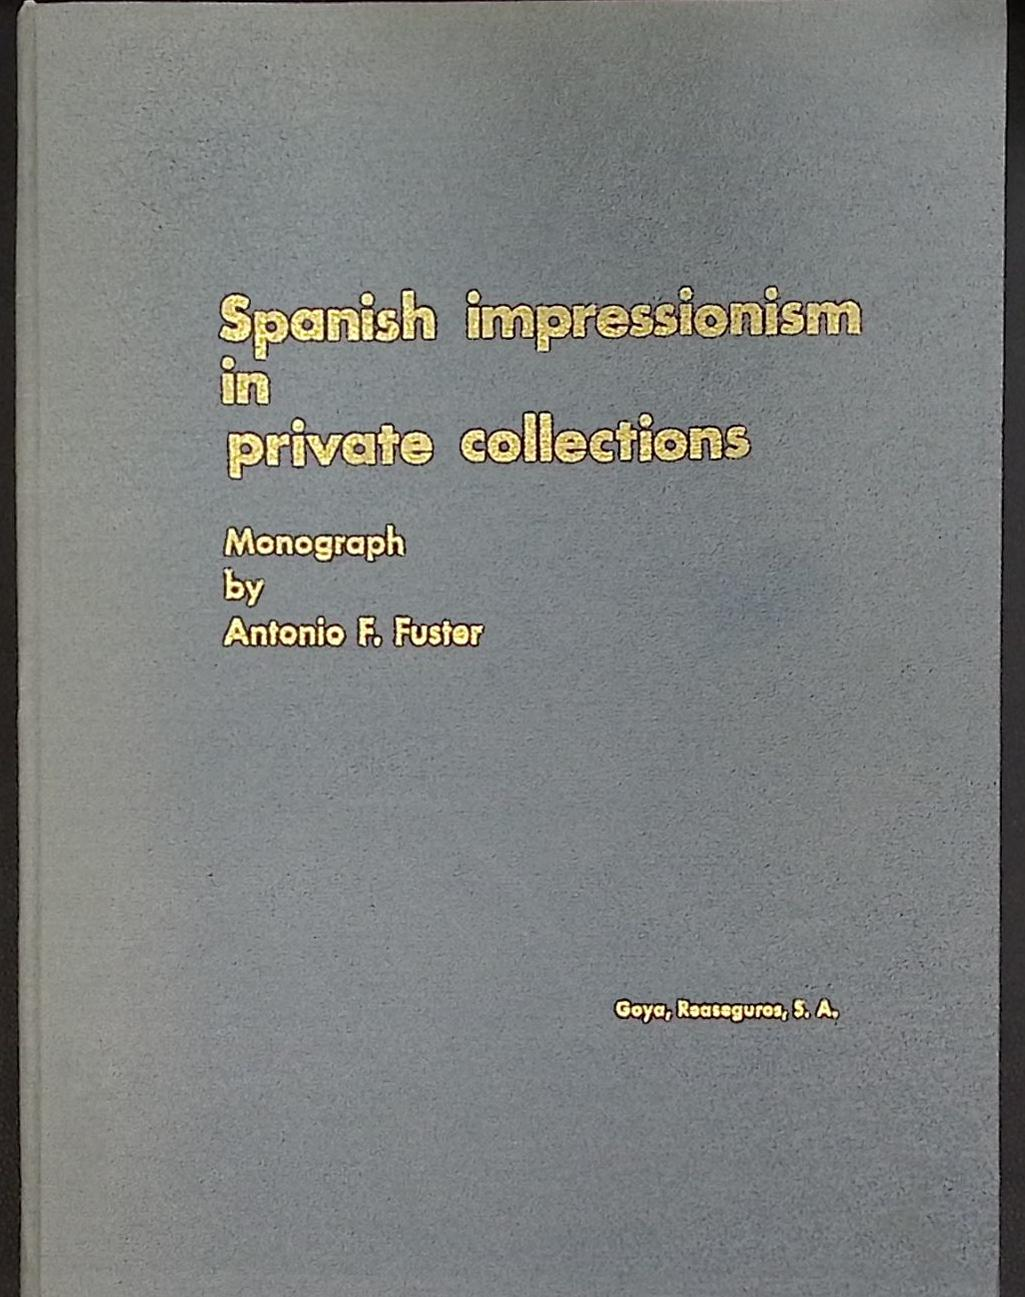 Spanish Impressionism in Private Collections